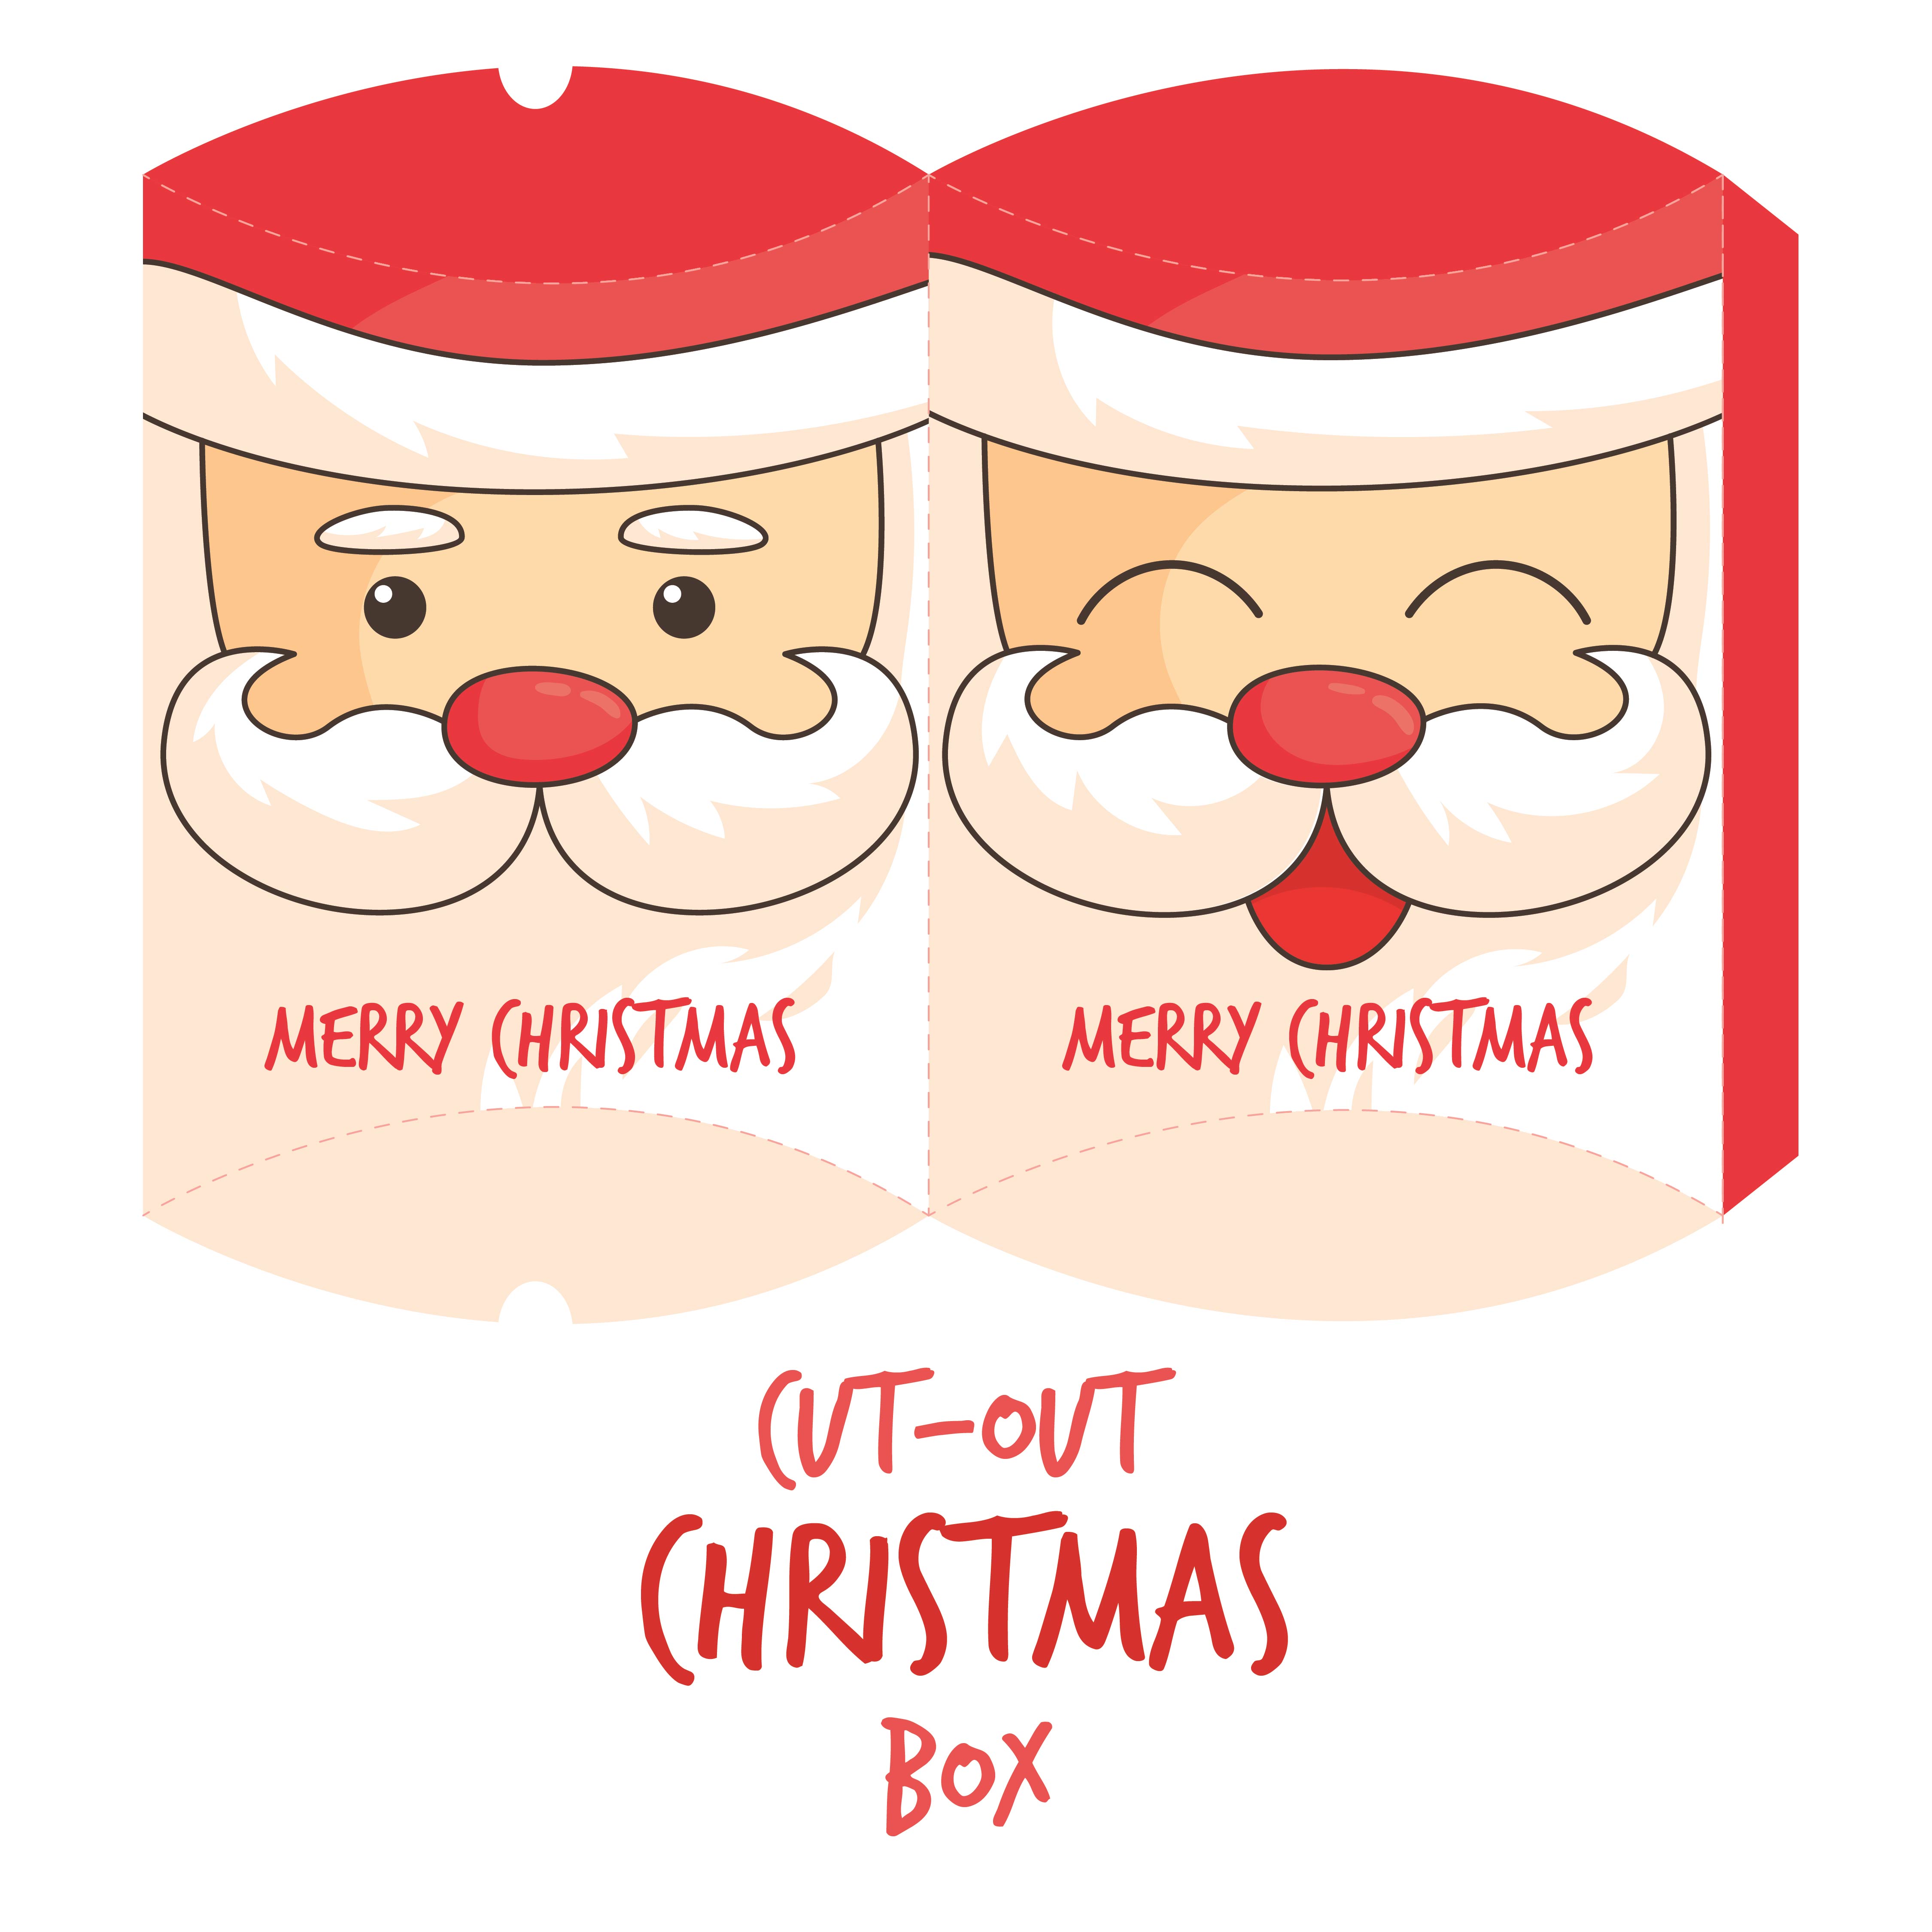 7 Best Images of Free Printable Christmas Gift Box Template - Free